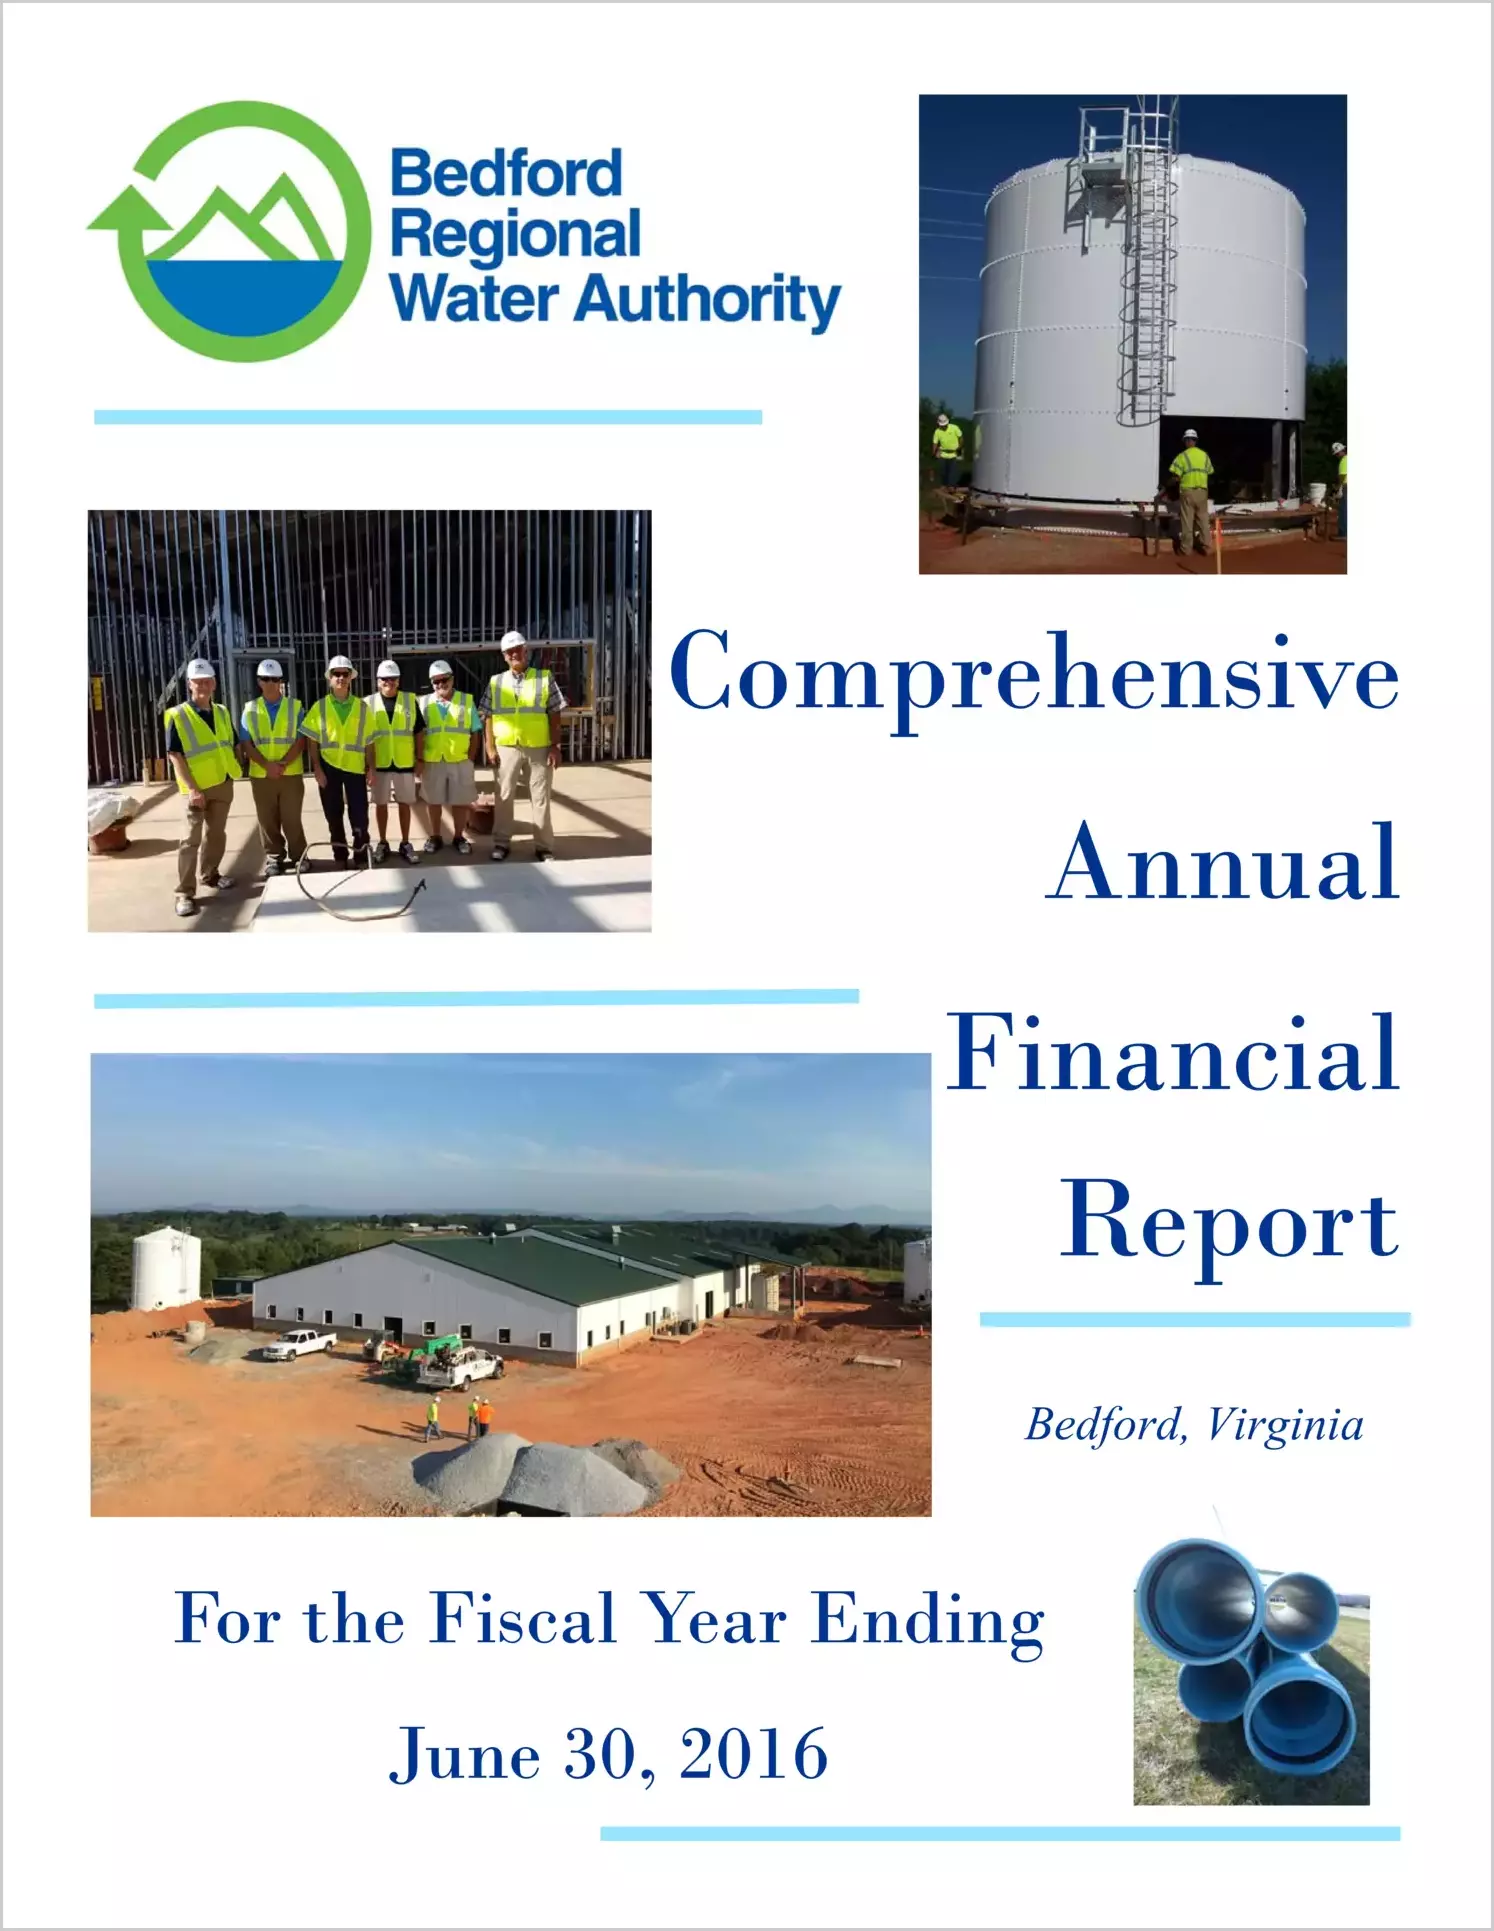 2016 ABC/Other Annual Financial Report  for Bedford Regional Water Authority